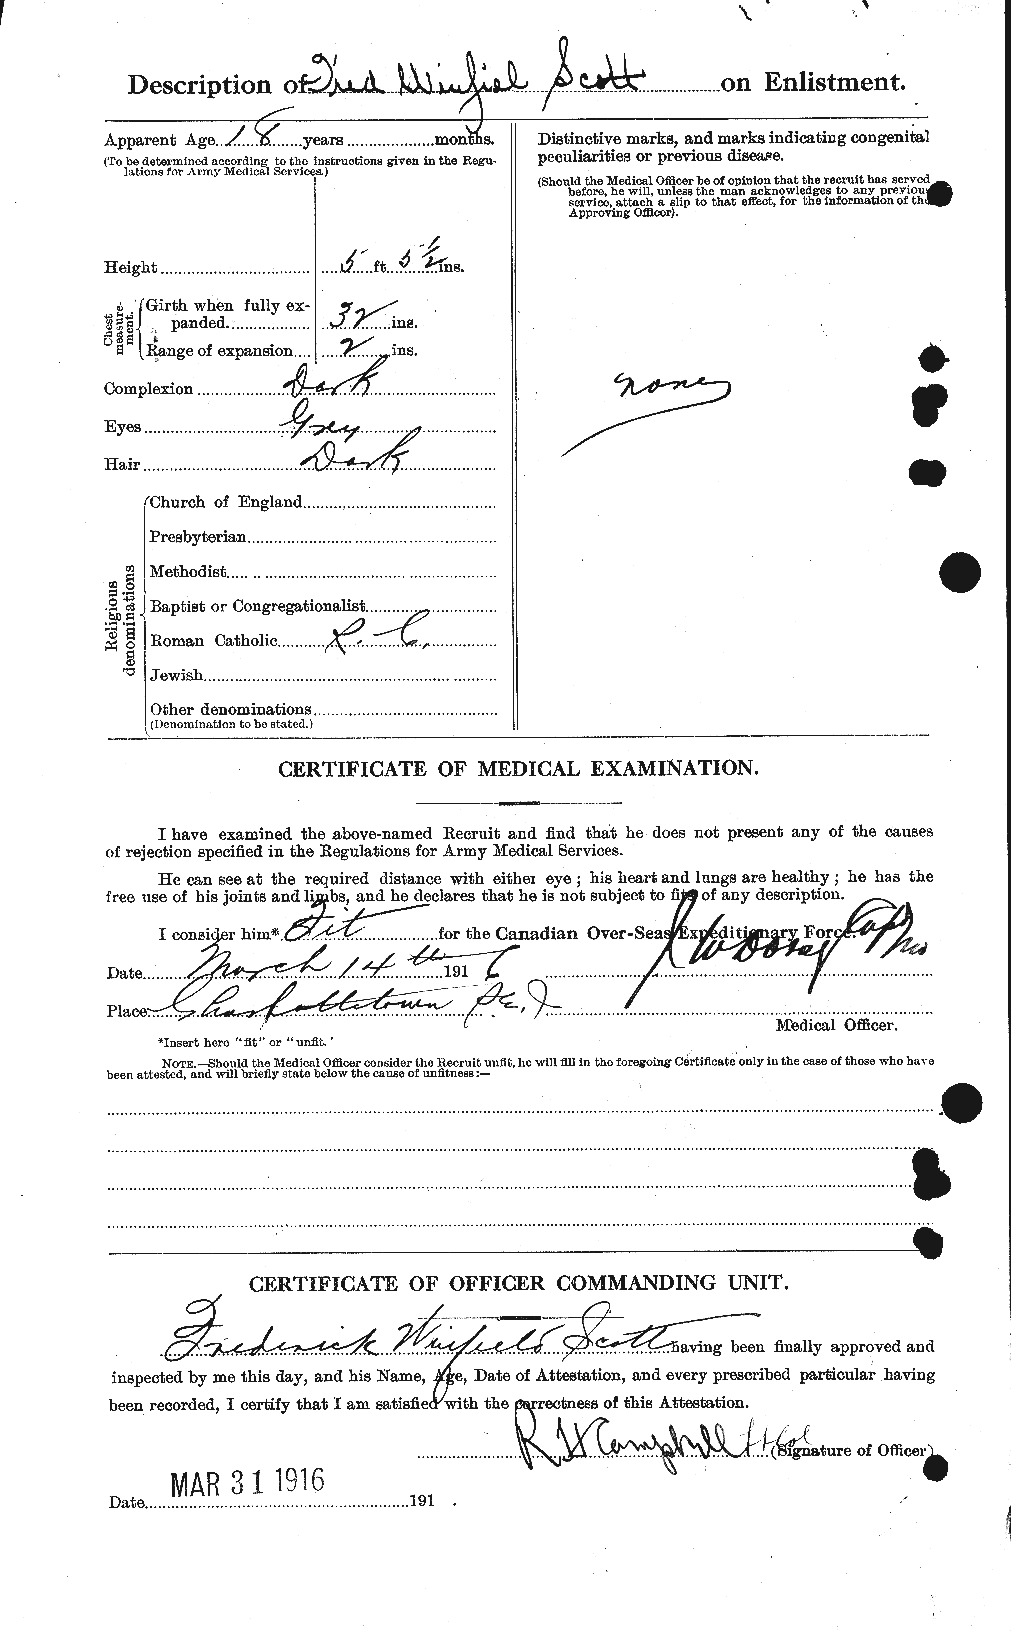 Personnel Records of the First World War - CEF 084378b